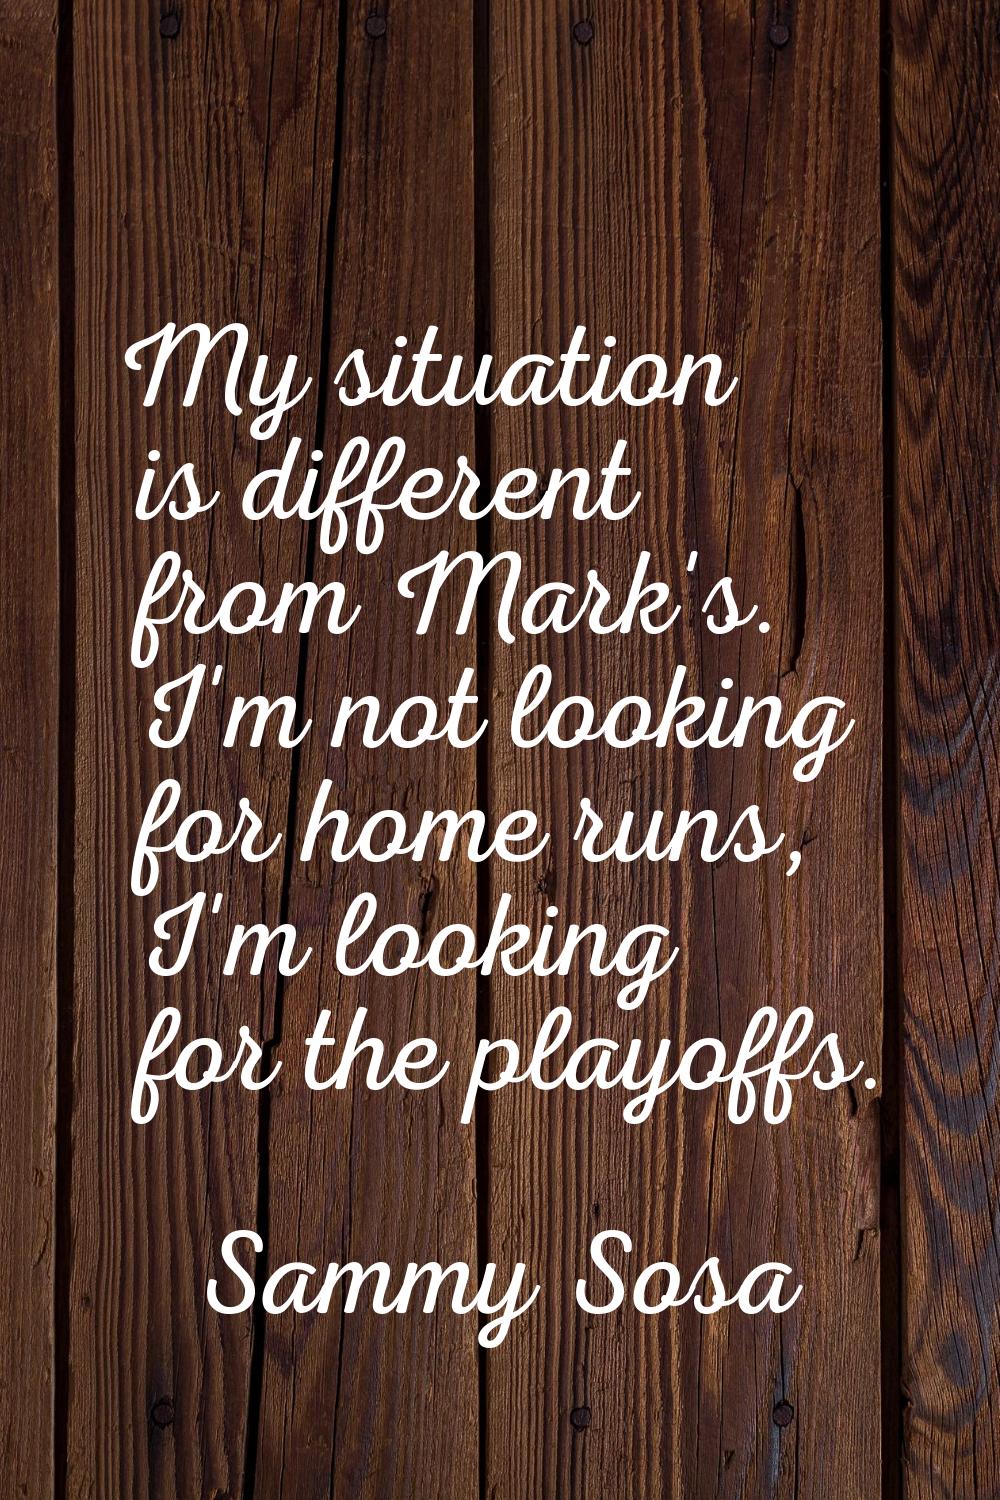 My situation is different from Mark's. I'm not looking for home runs, I'm looking for the playoffs.